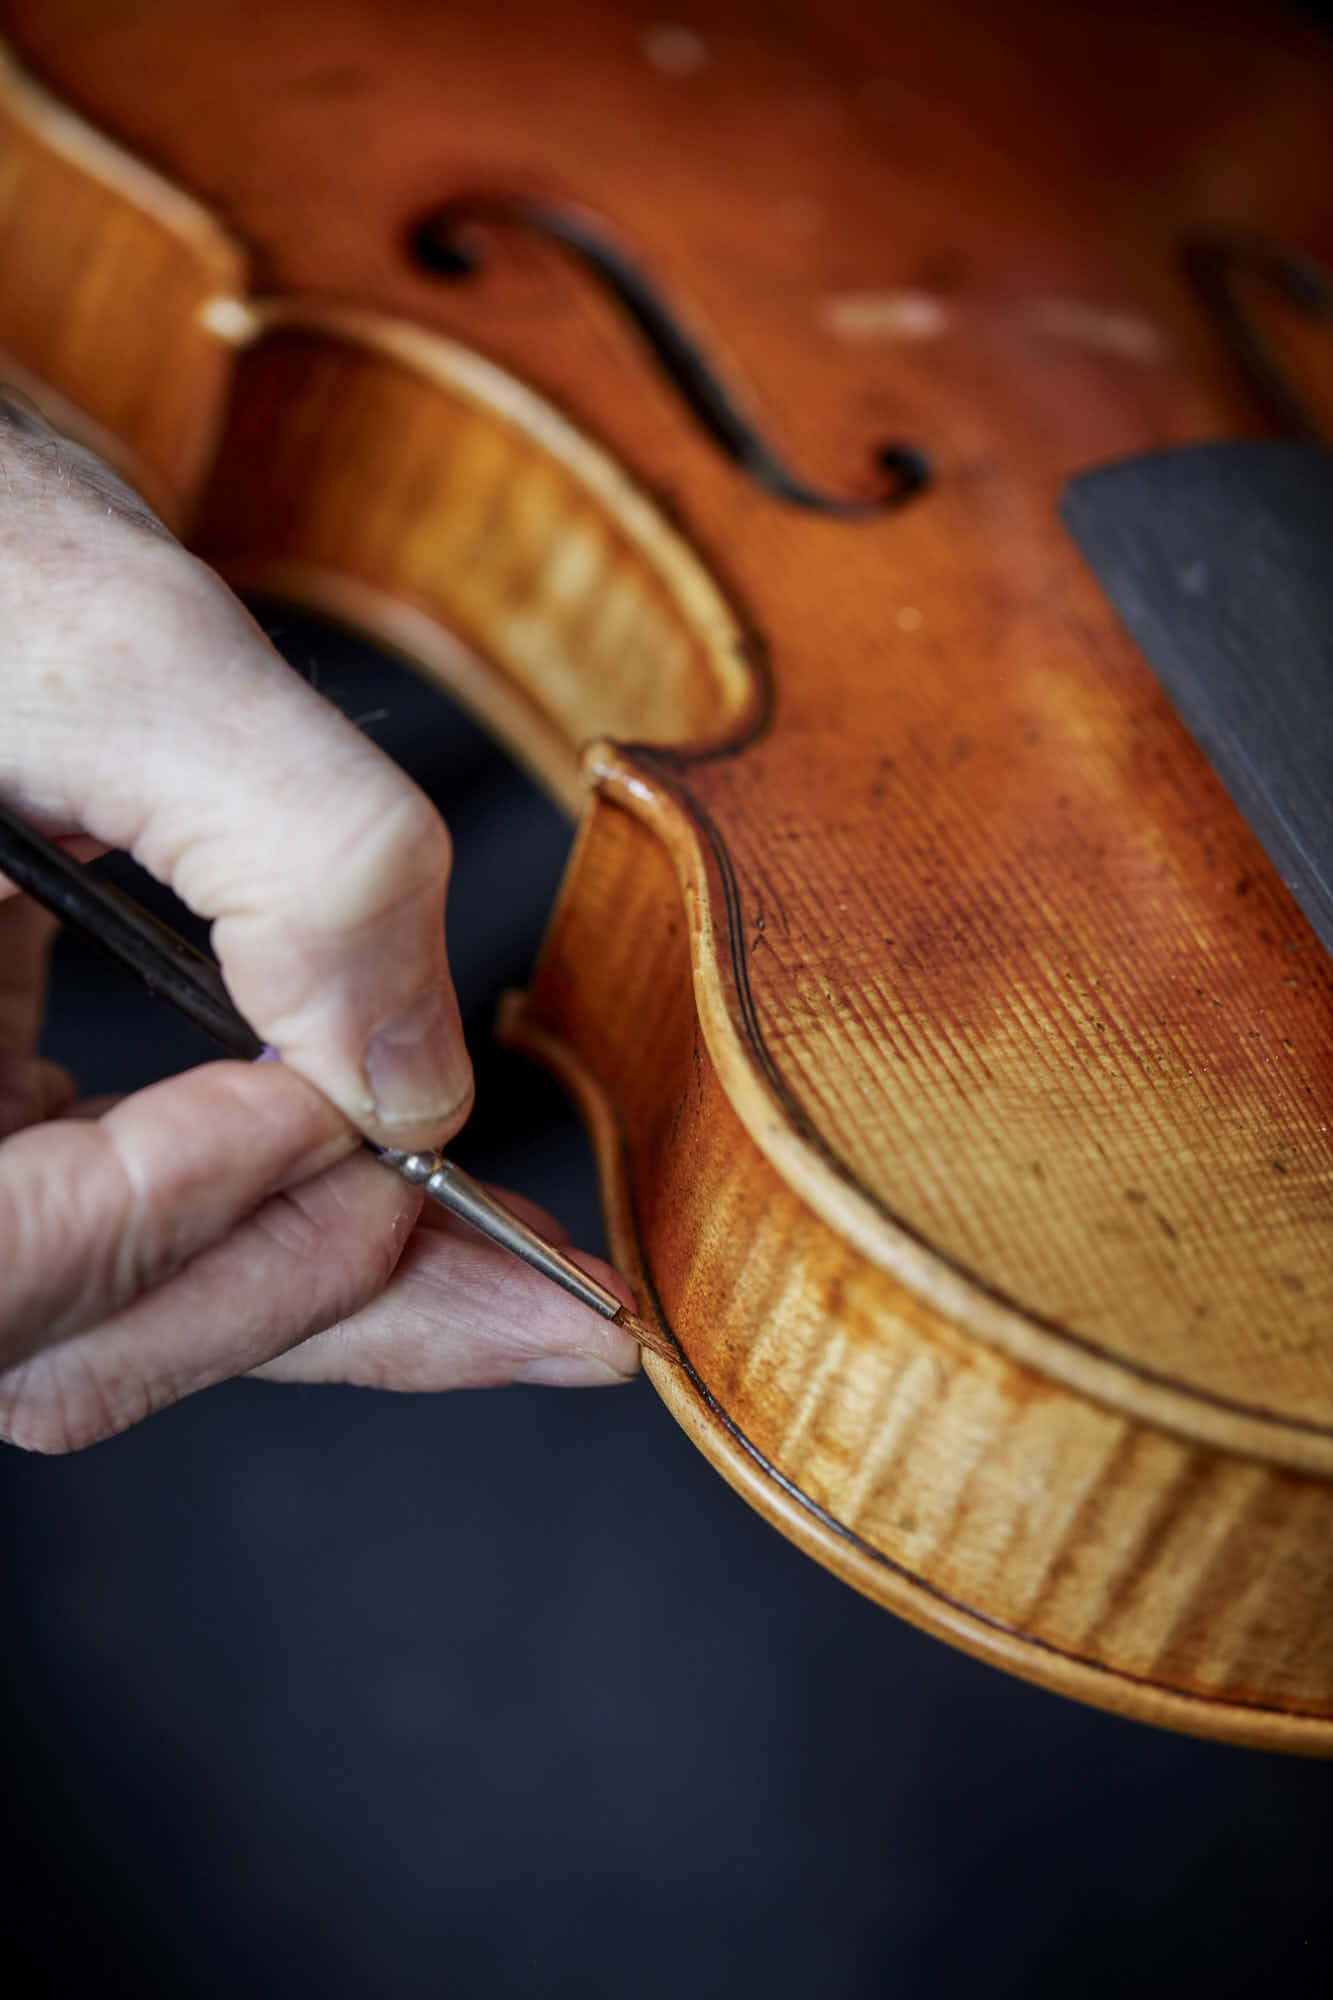 Painting details on violin